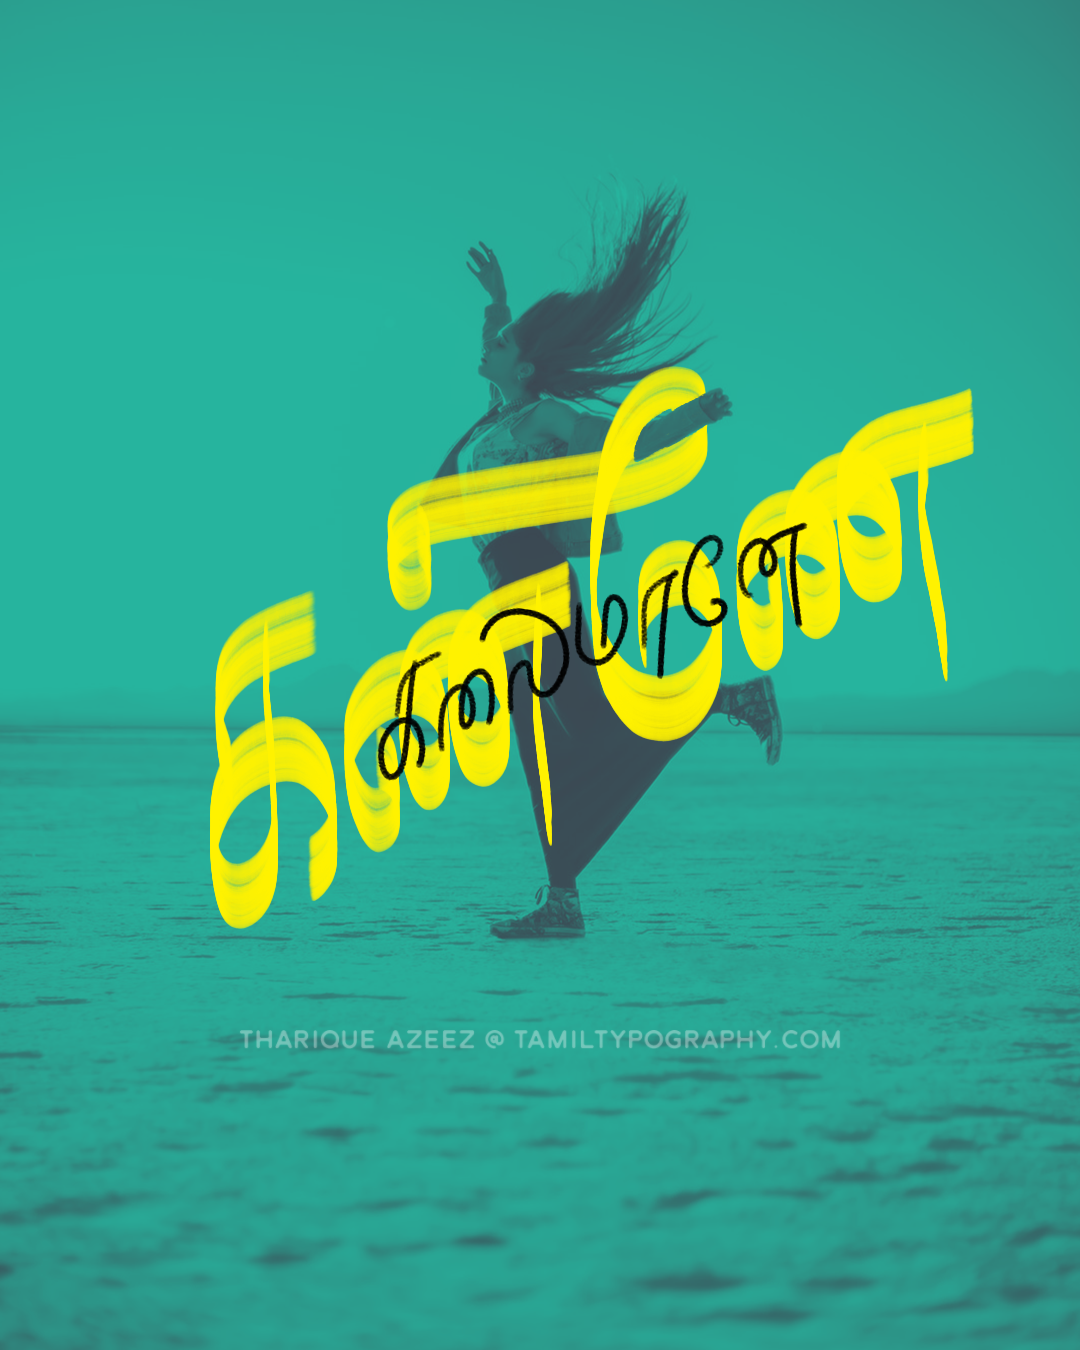 tamil Tamil Typography font tamil fonts Tamizh typedesign graphic design  lettering Calligraphy  